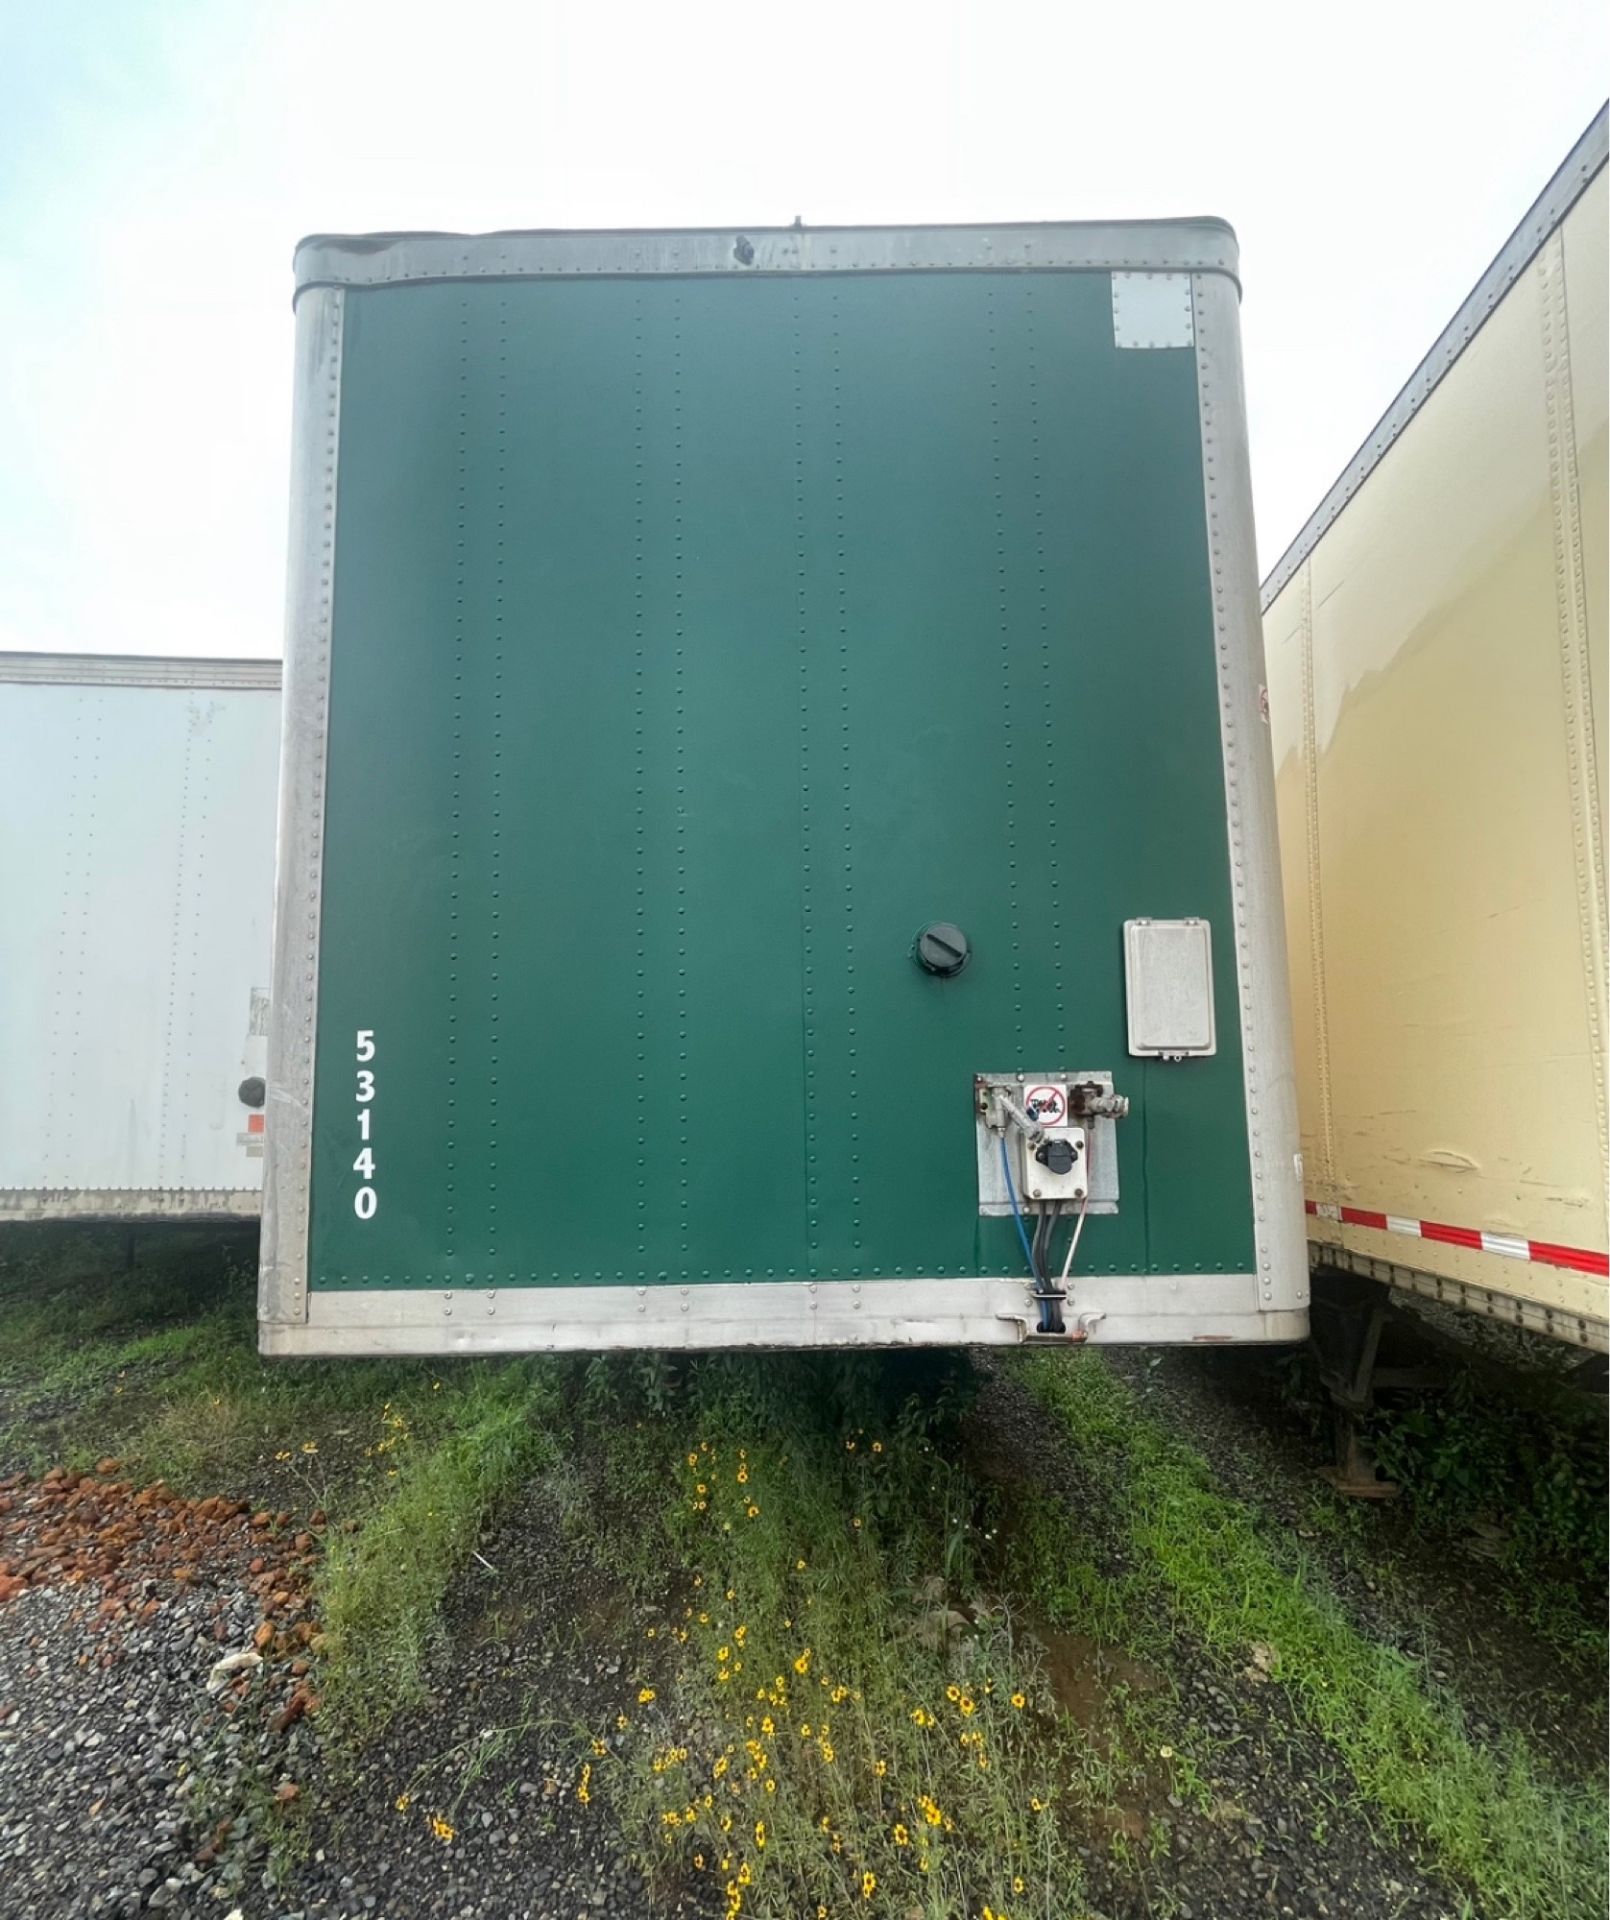 2002 Wabash Van Trailer 53’ Tandem Axel Has Title, VIN IJJV532W52L787045 - A $25 TITLE FEE WILL BE - Image 4 of 12